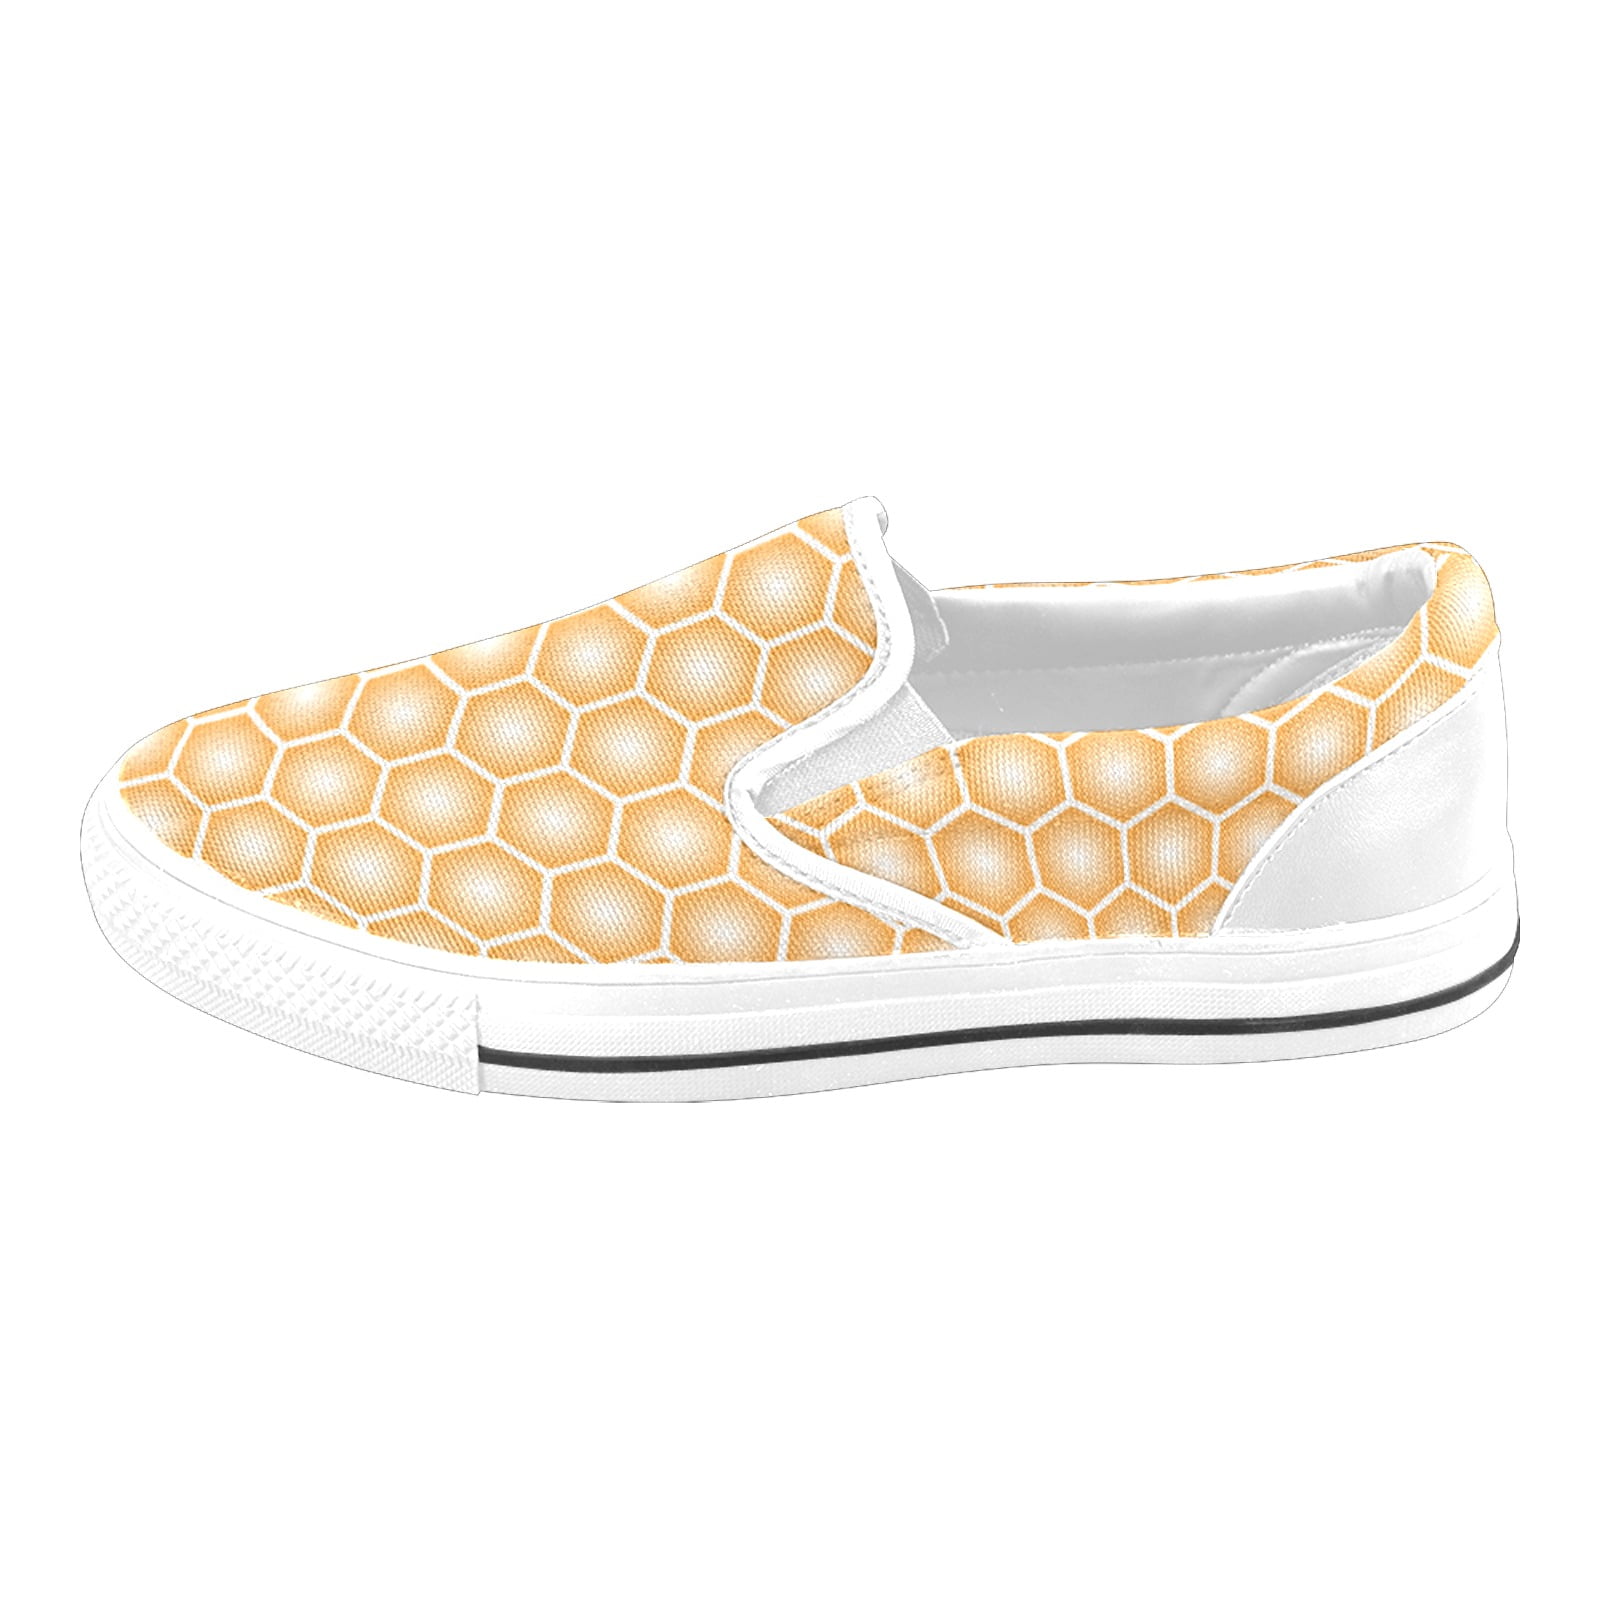 Mens Slip On Shoes Bumble Bee=14 Women's Fashion Art Casual Canvas ...